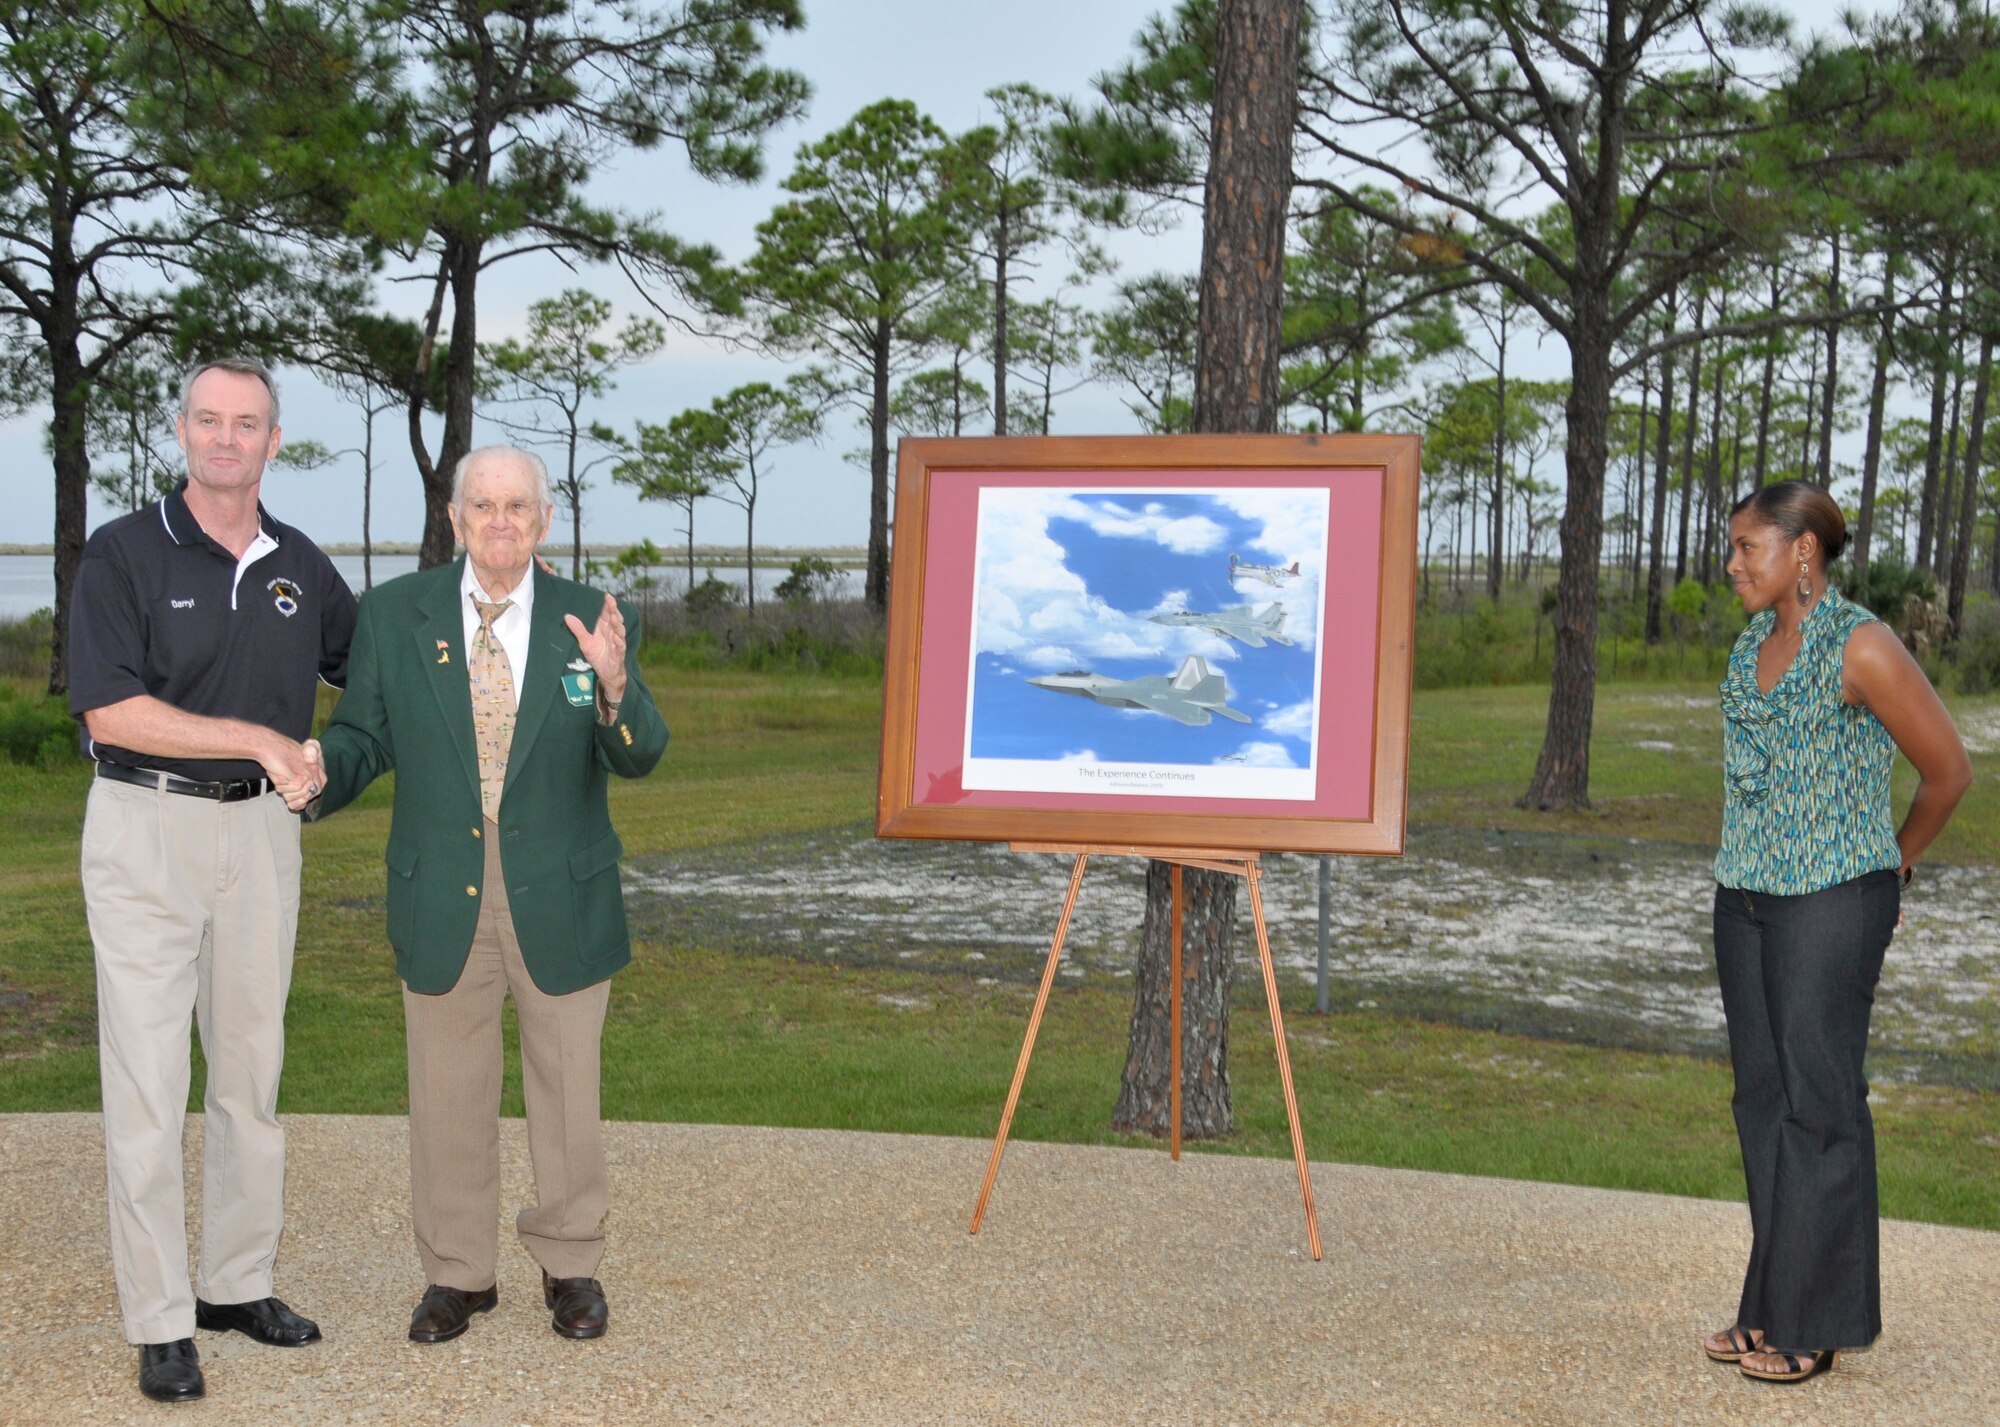 Brigadier General Darryl Roberson, Retired Lt. Col. Raymond MacKinnon and Captain Adrienne Beamon unveil "The Experience Continues" painting Sept. 11 at the Heritage Club.